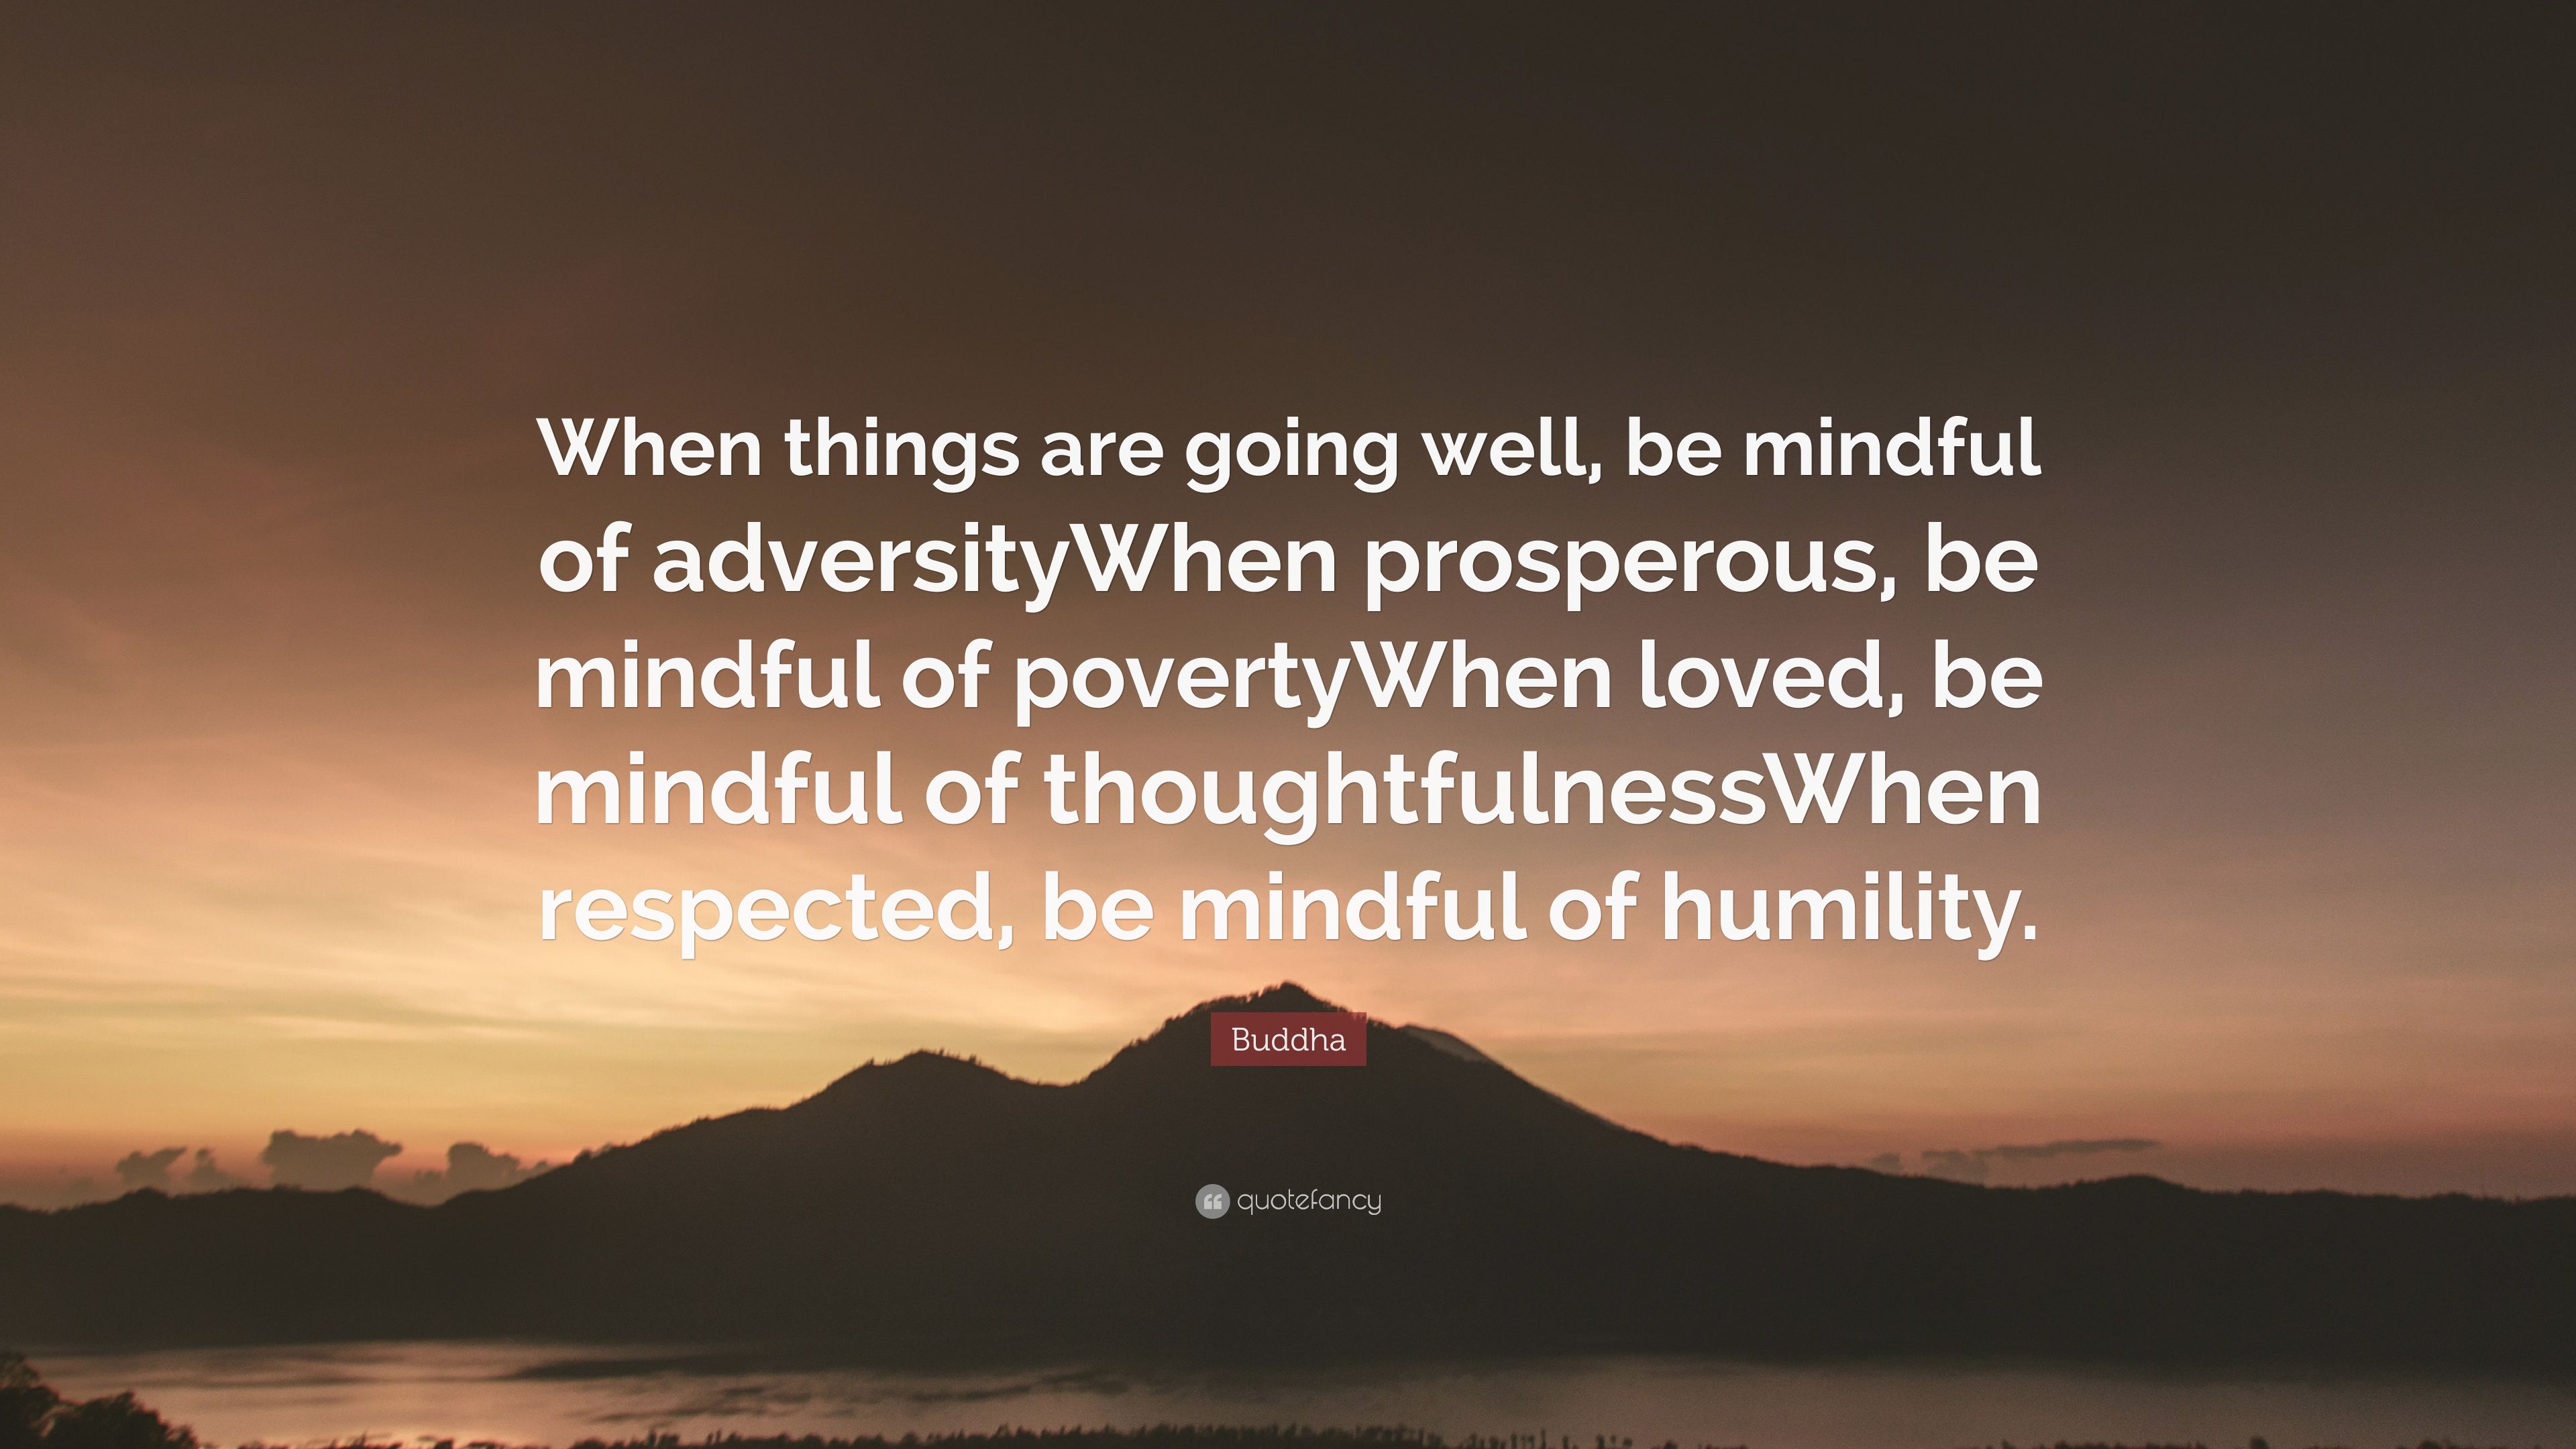 Buddha Quote: “When things are going well, be mindful of adversityWhen prosperous, be mindful of povertyWhen loved, be mindful of thoug.” (7 wallpaper)